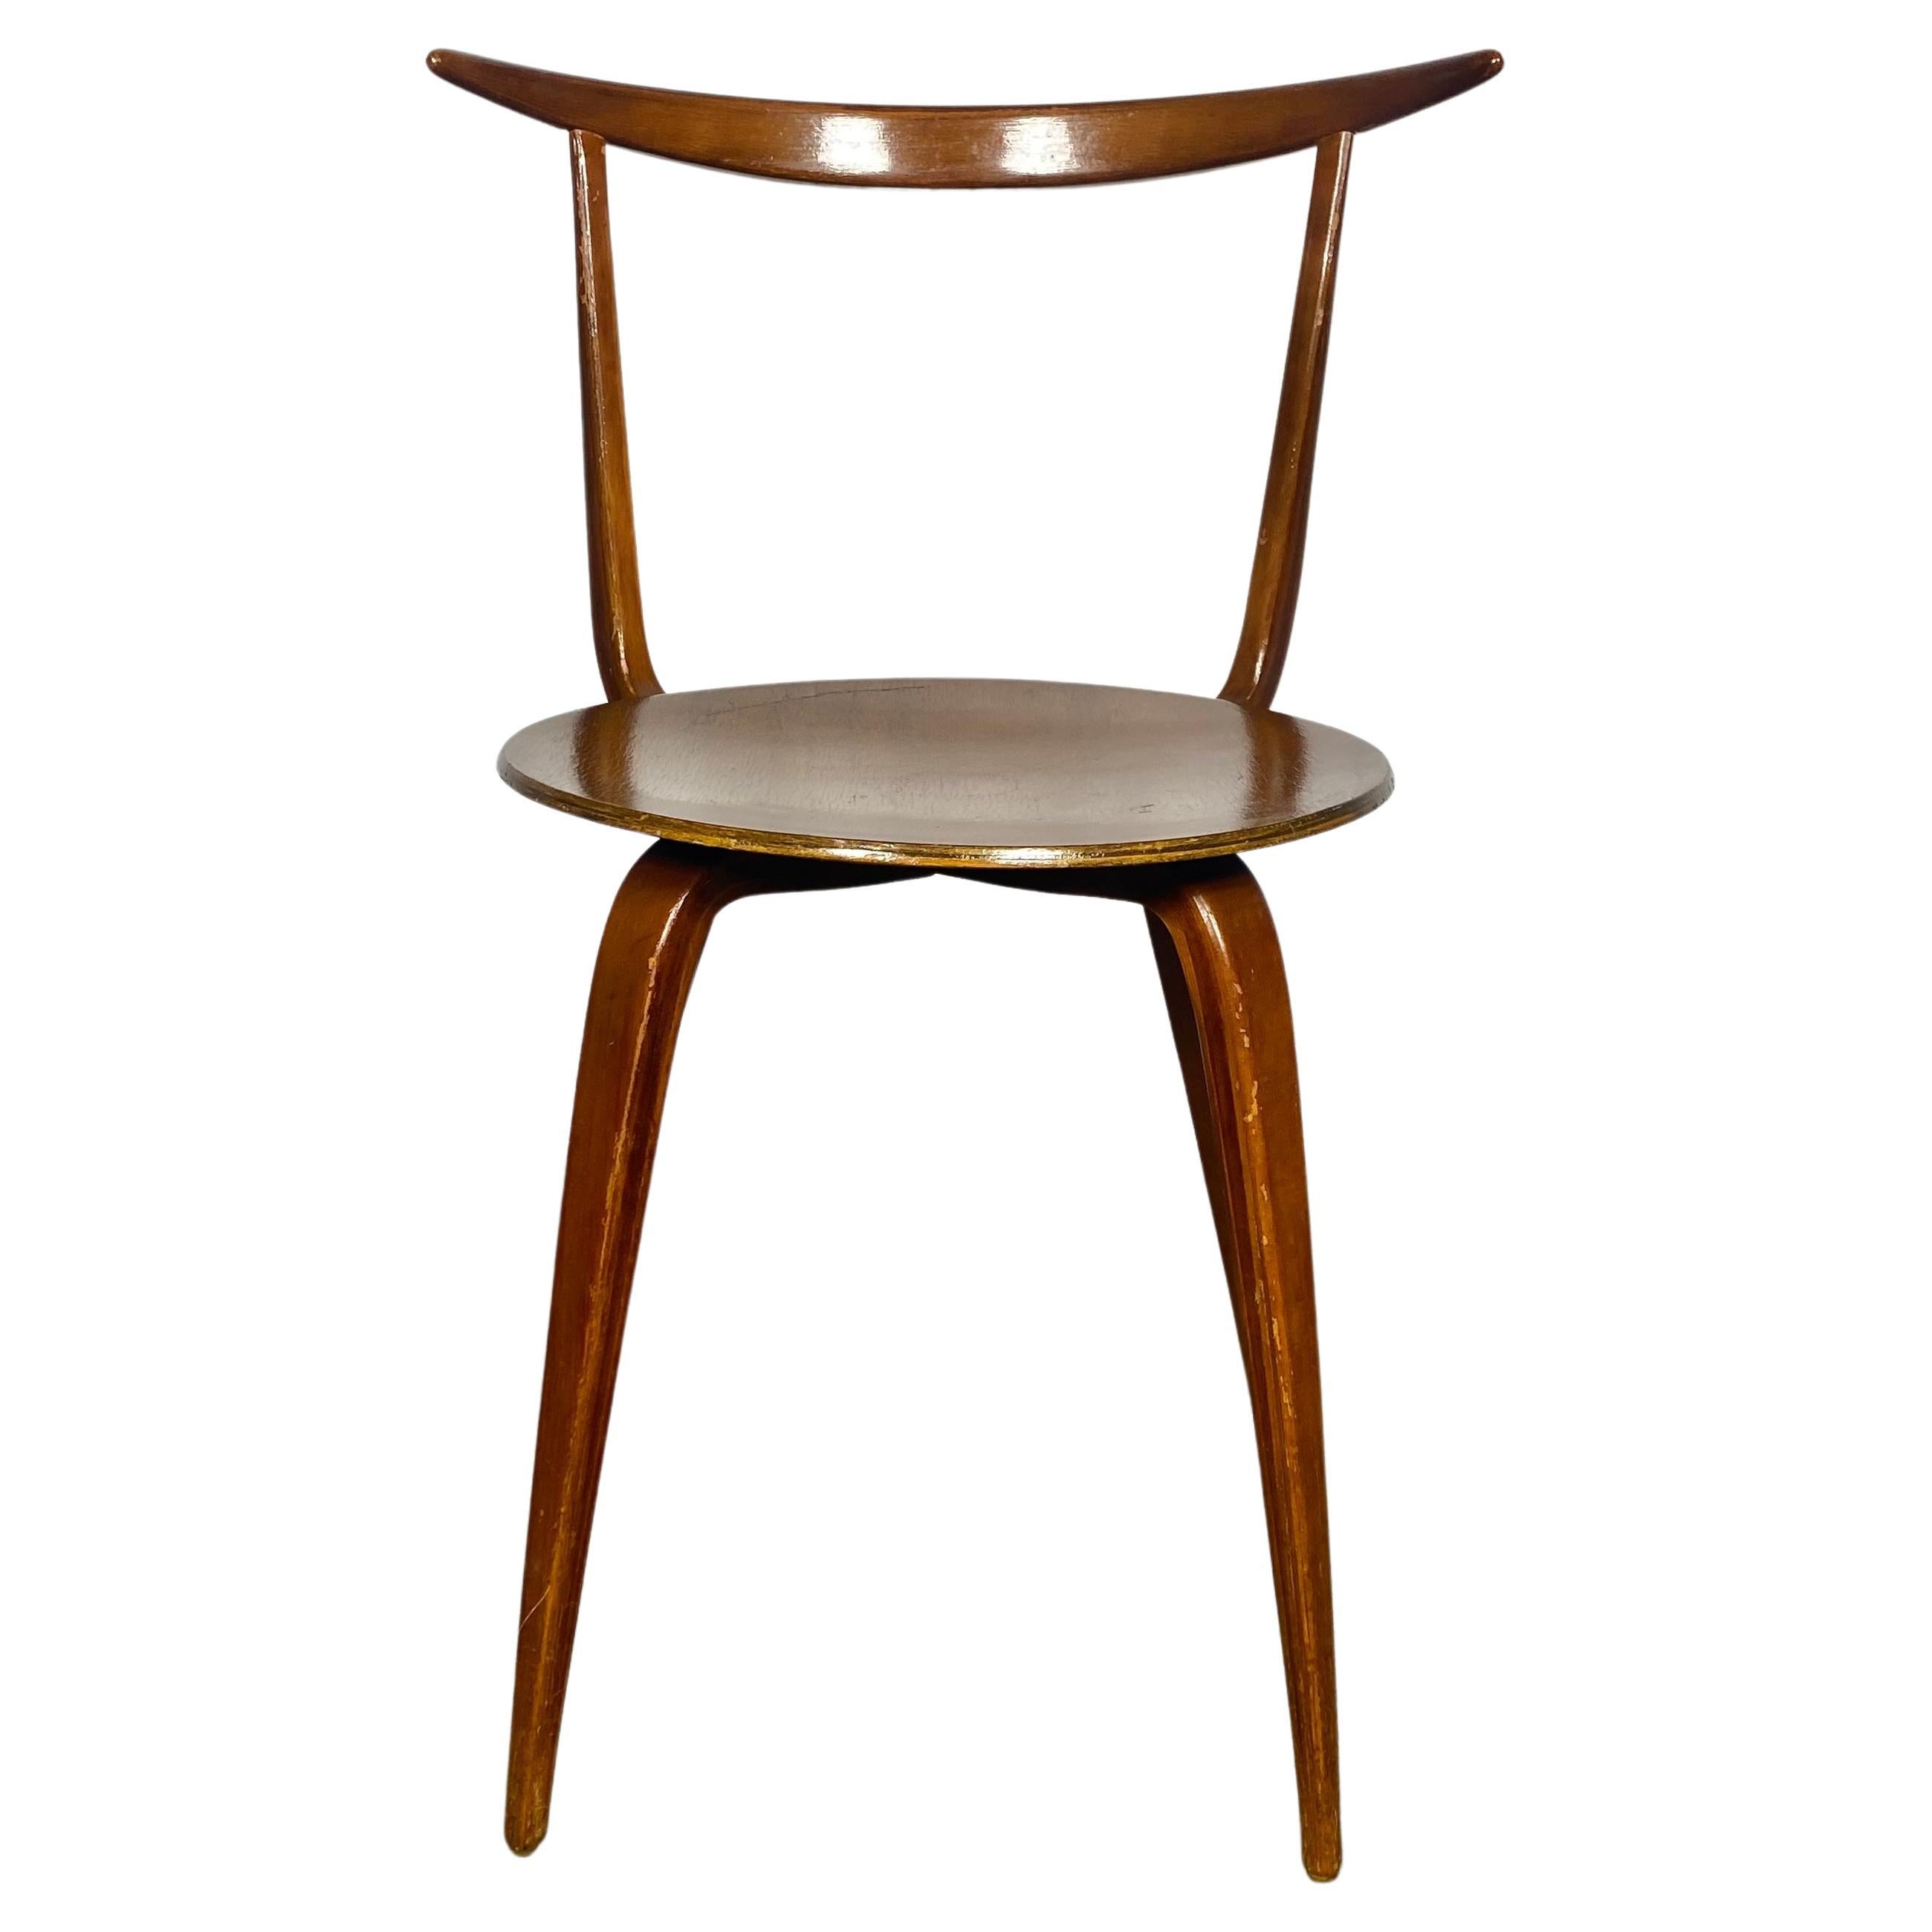 Early and Rare Pretzel sIDE Chair by George Nelson